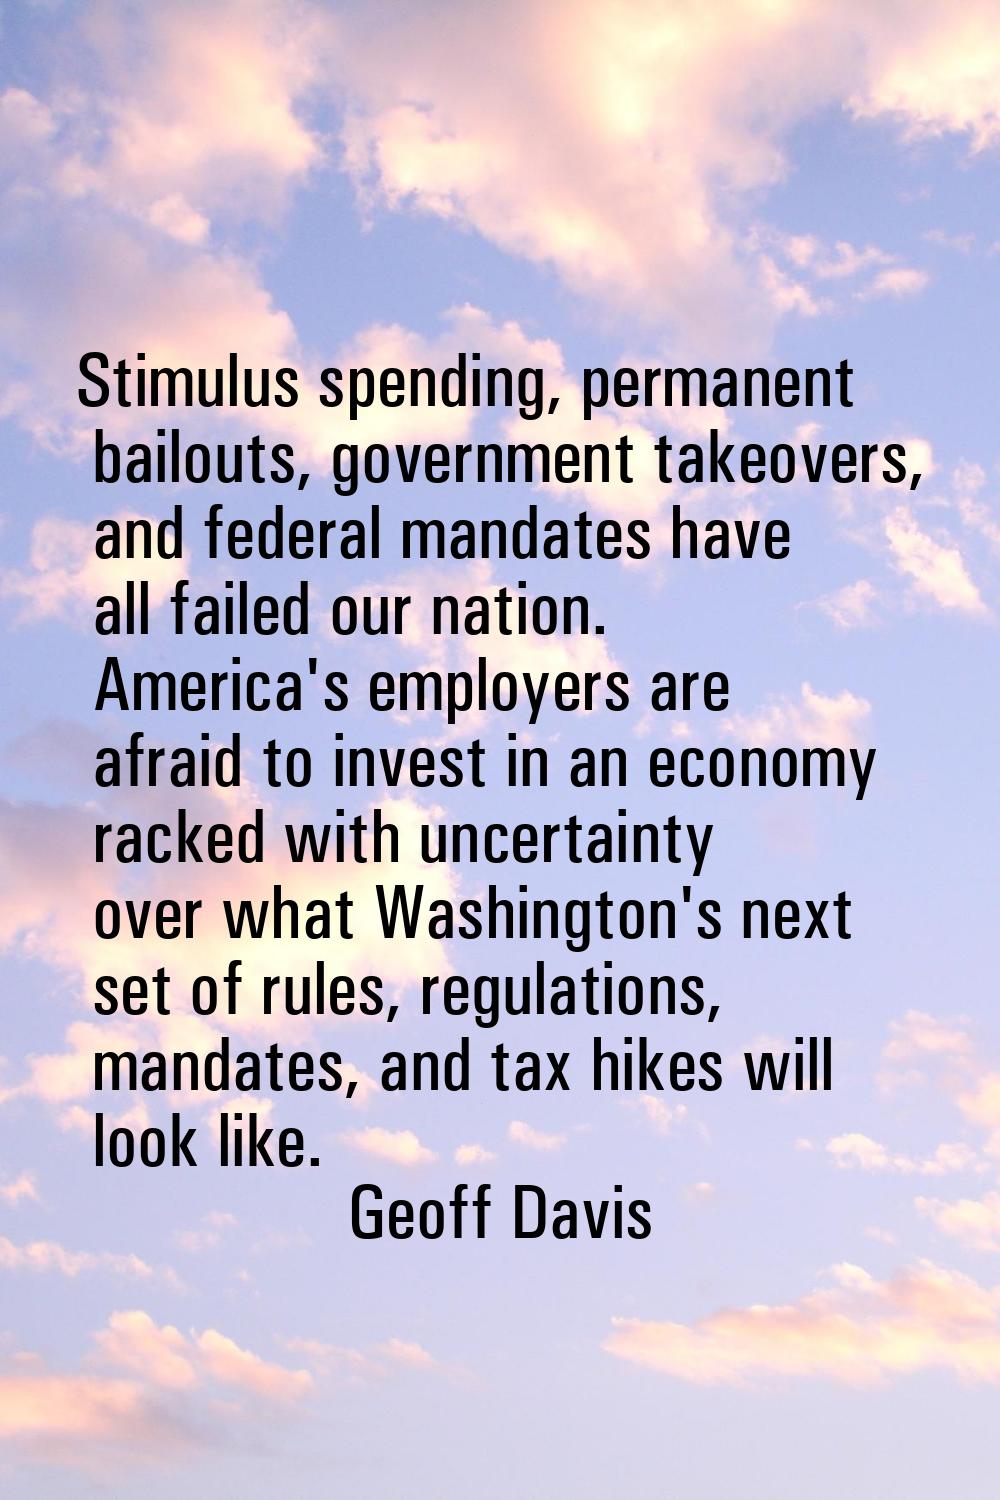 Stimulus spending, permanent bailouts, government takeovers, and federal mandates have all failed o